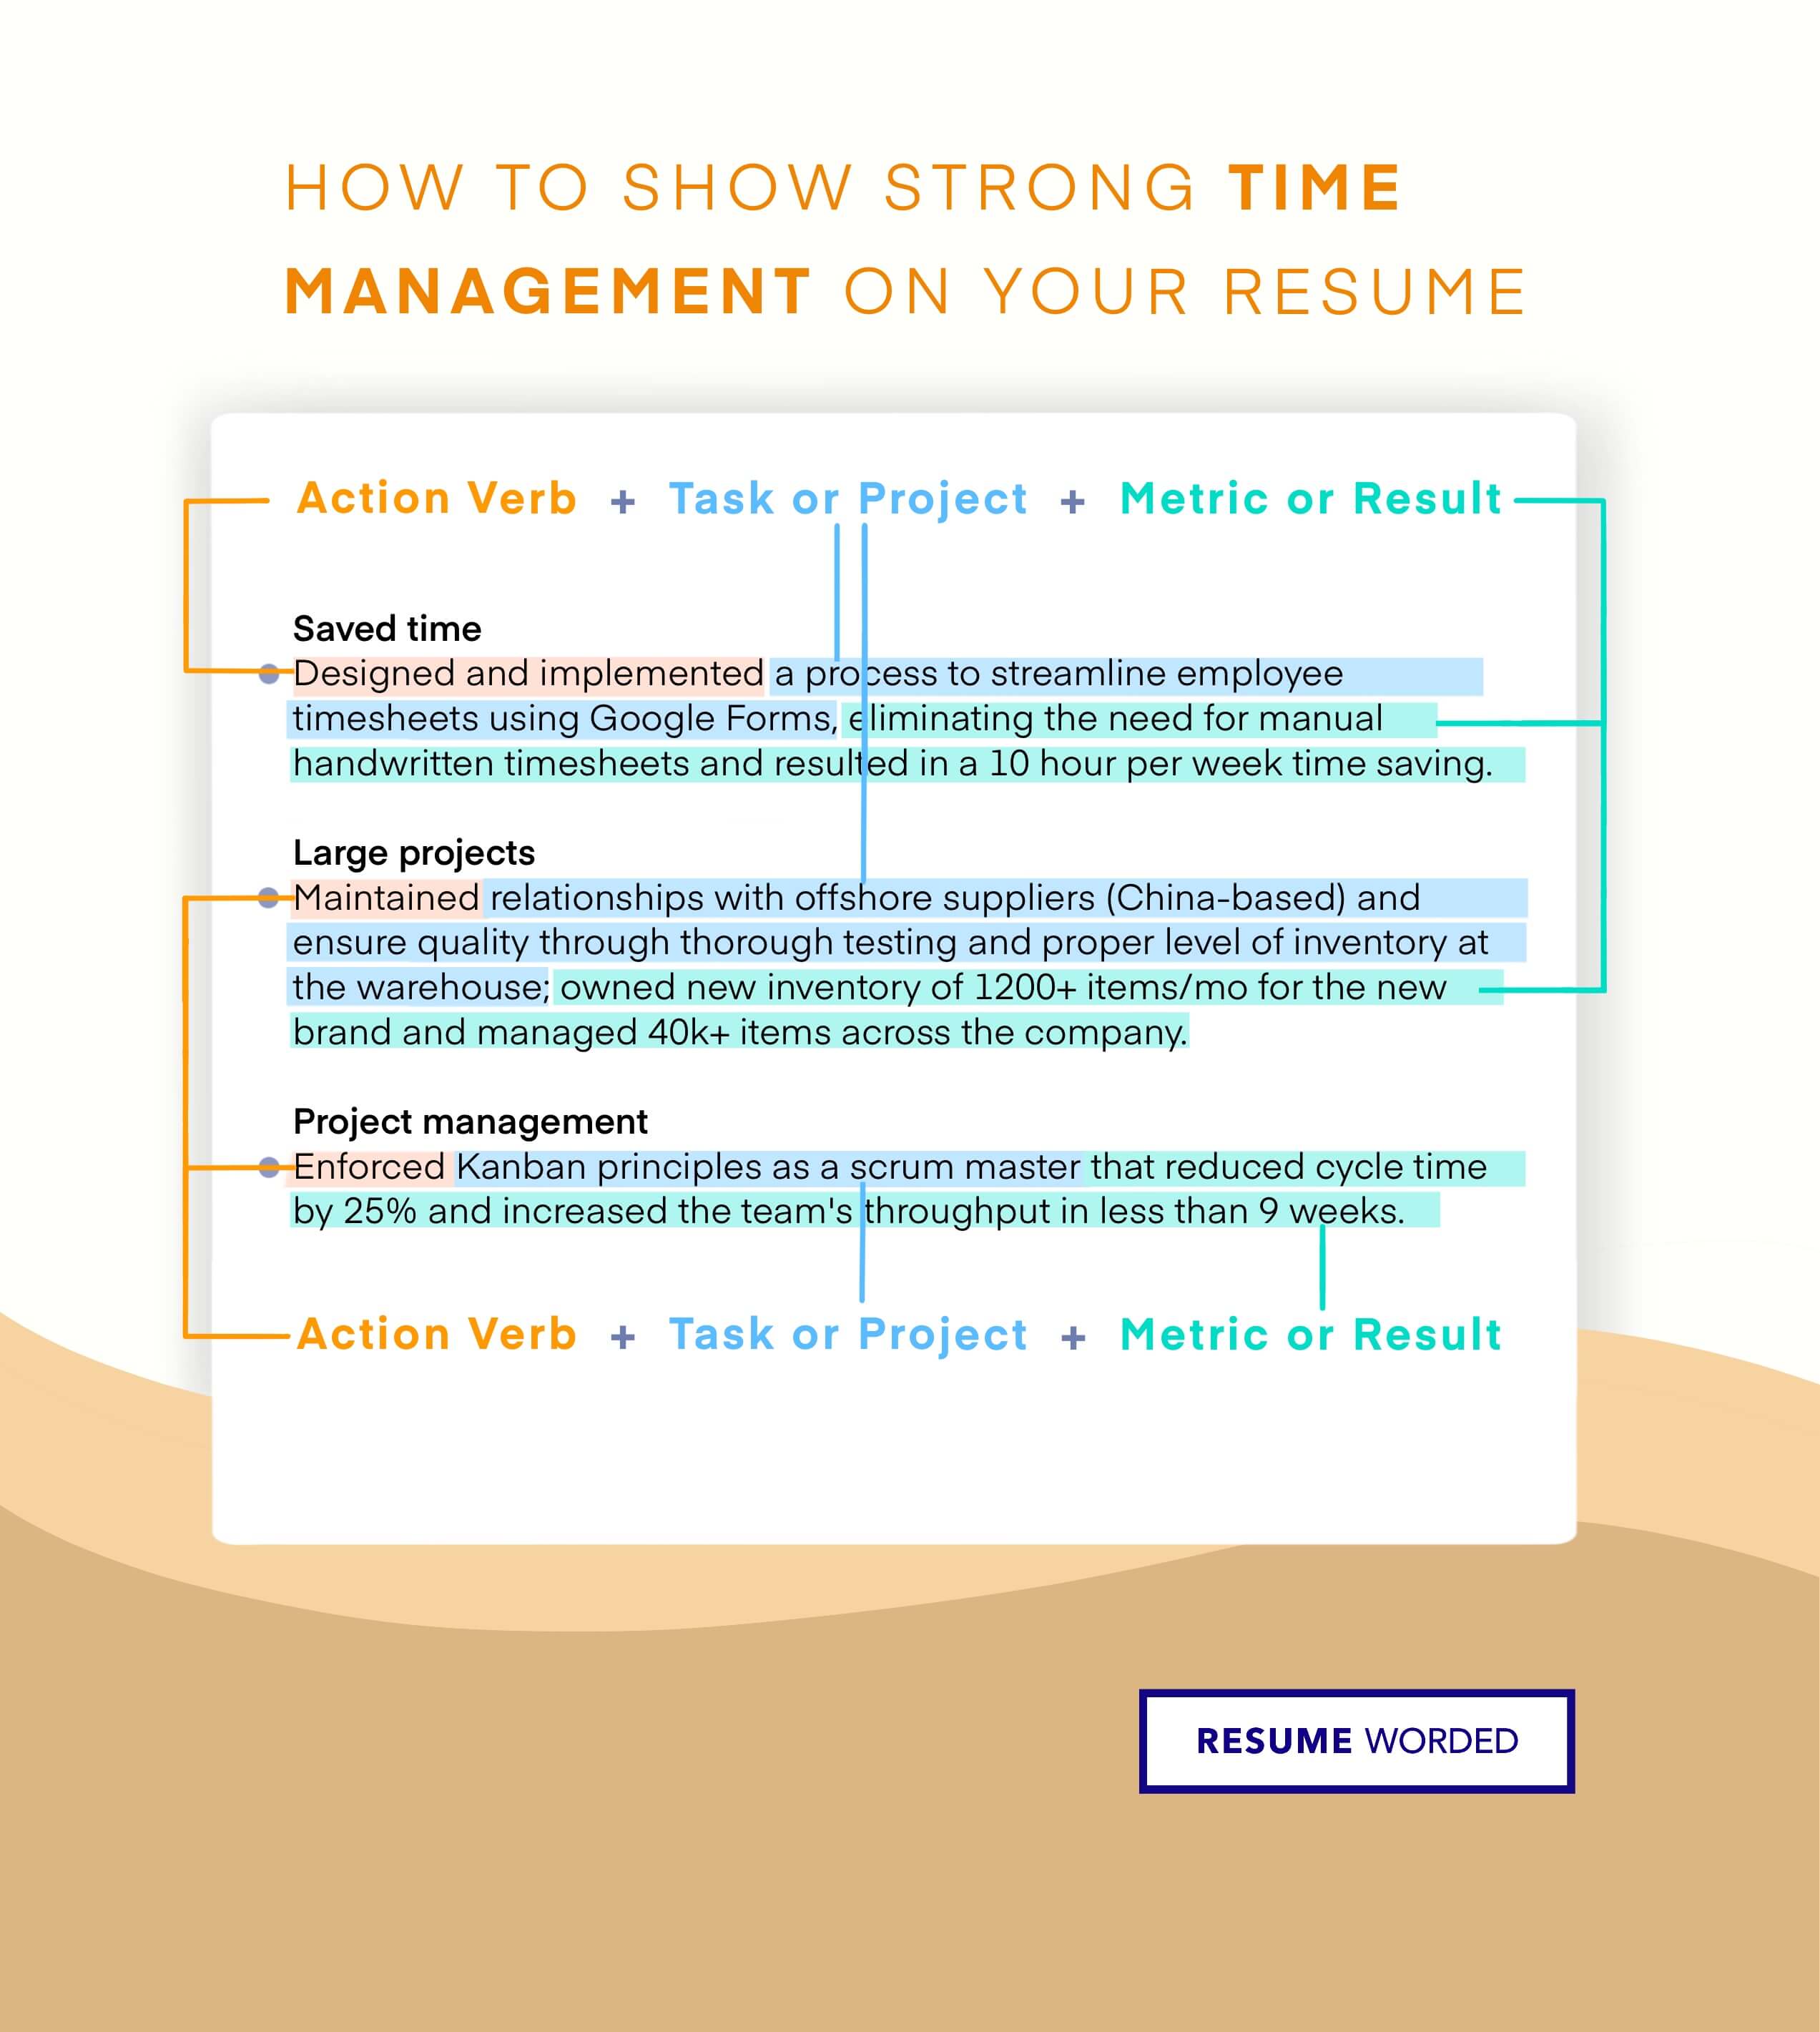 How to highlight time management in your resume's bullet points